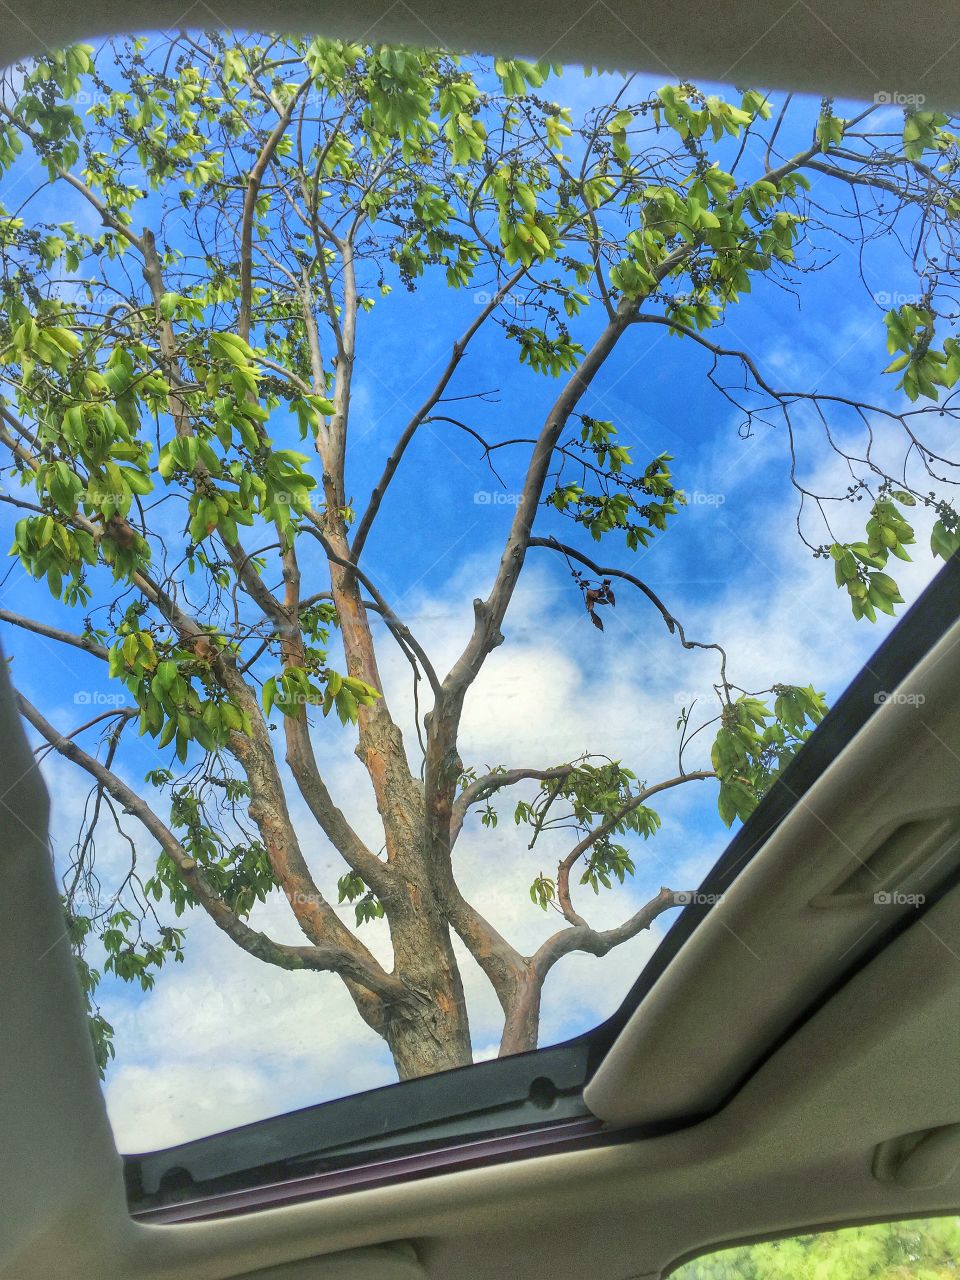 Looking Up At The Sky And Trees 
Through Car Sunroof